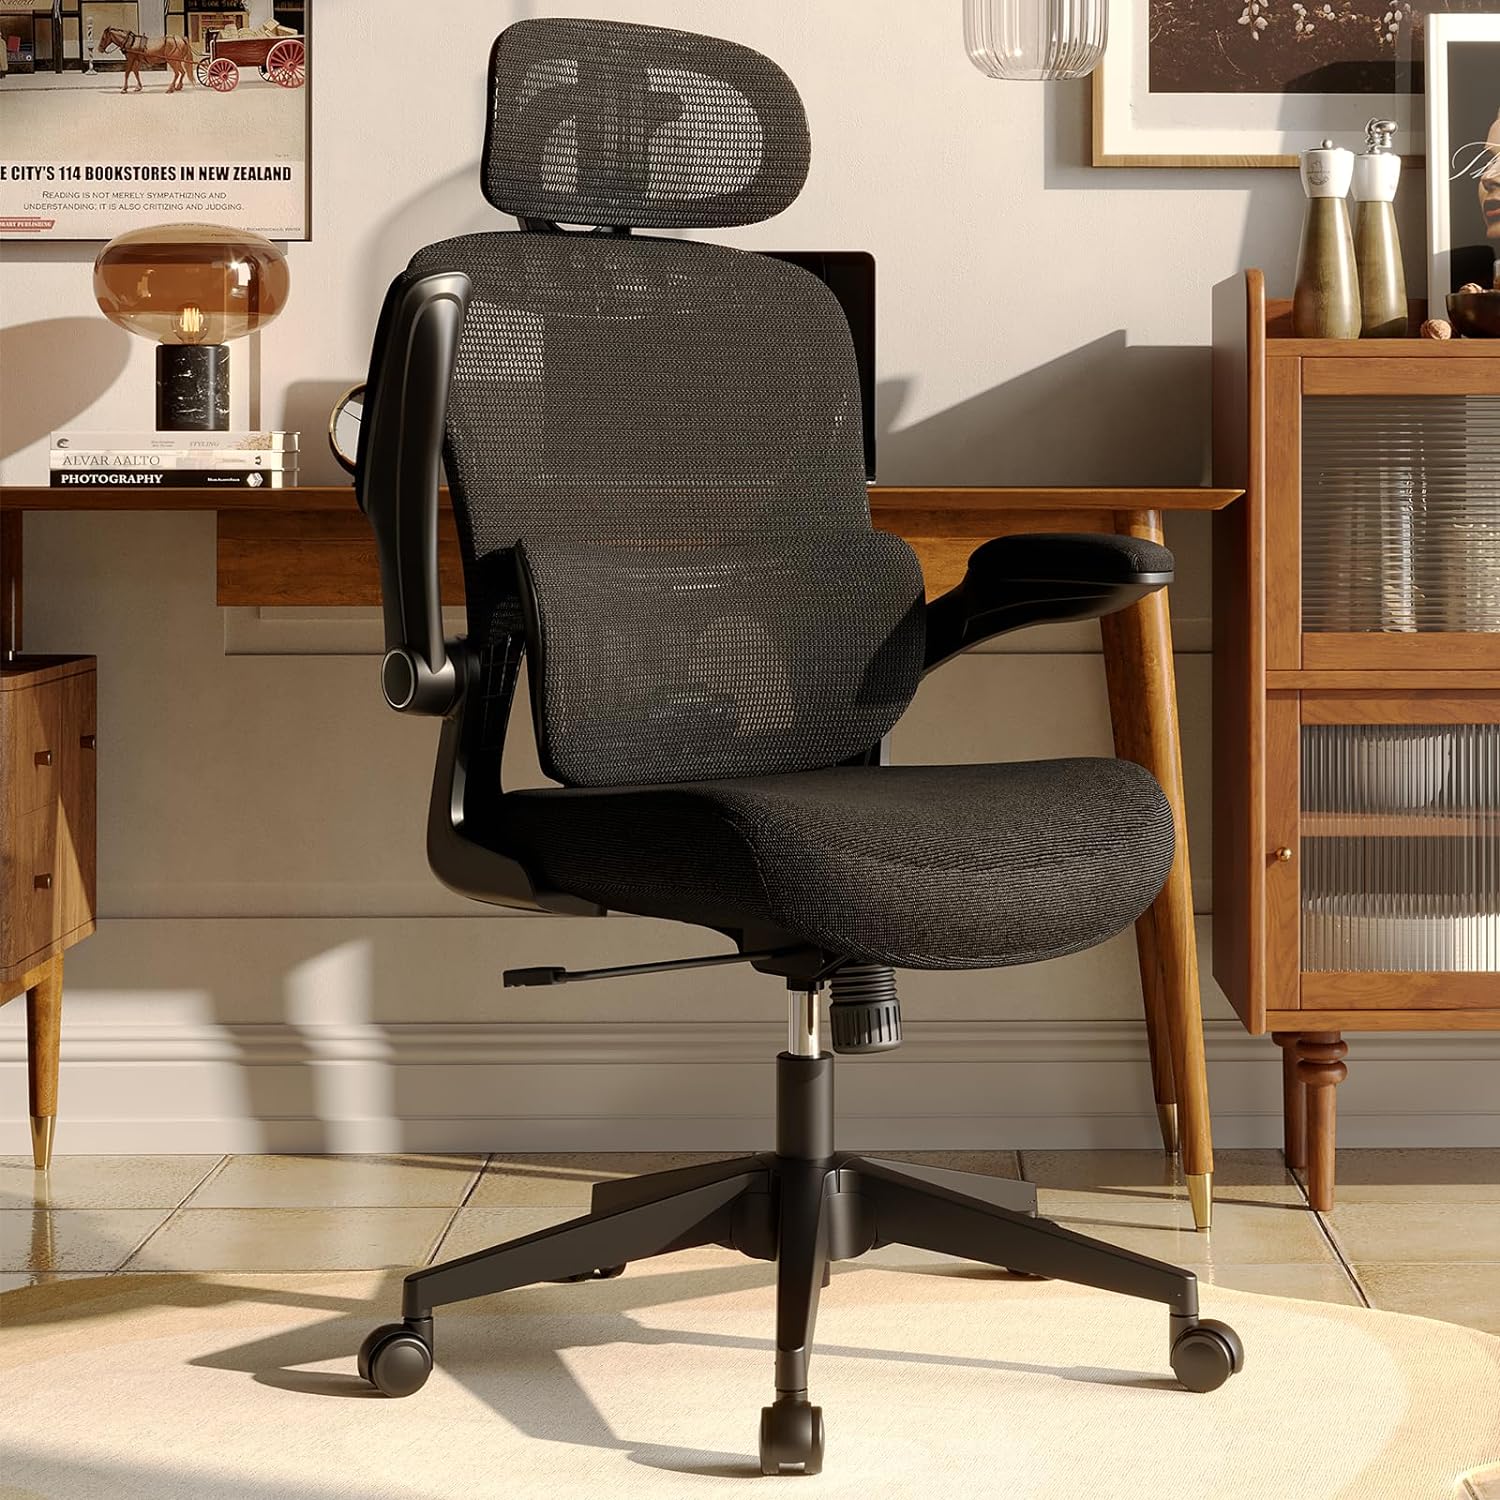 Sunnow Ergonomic Chair: Customizable comfort for all-day support. Reduce back pain, improve posture